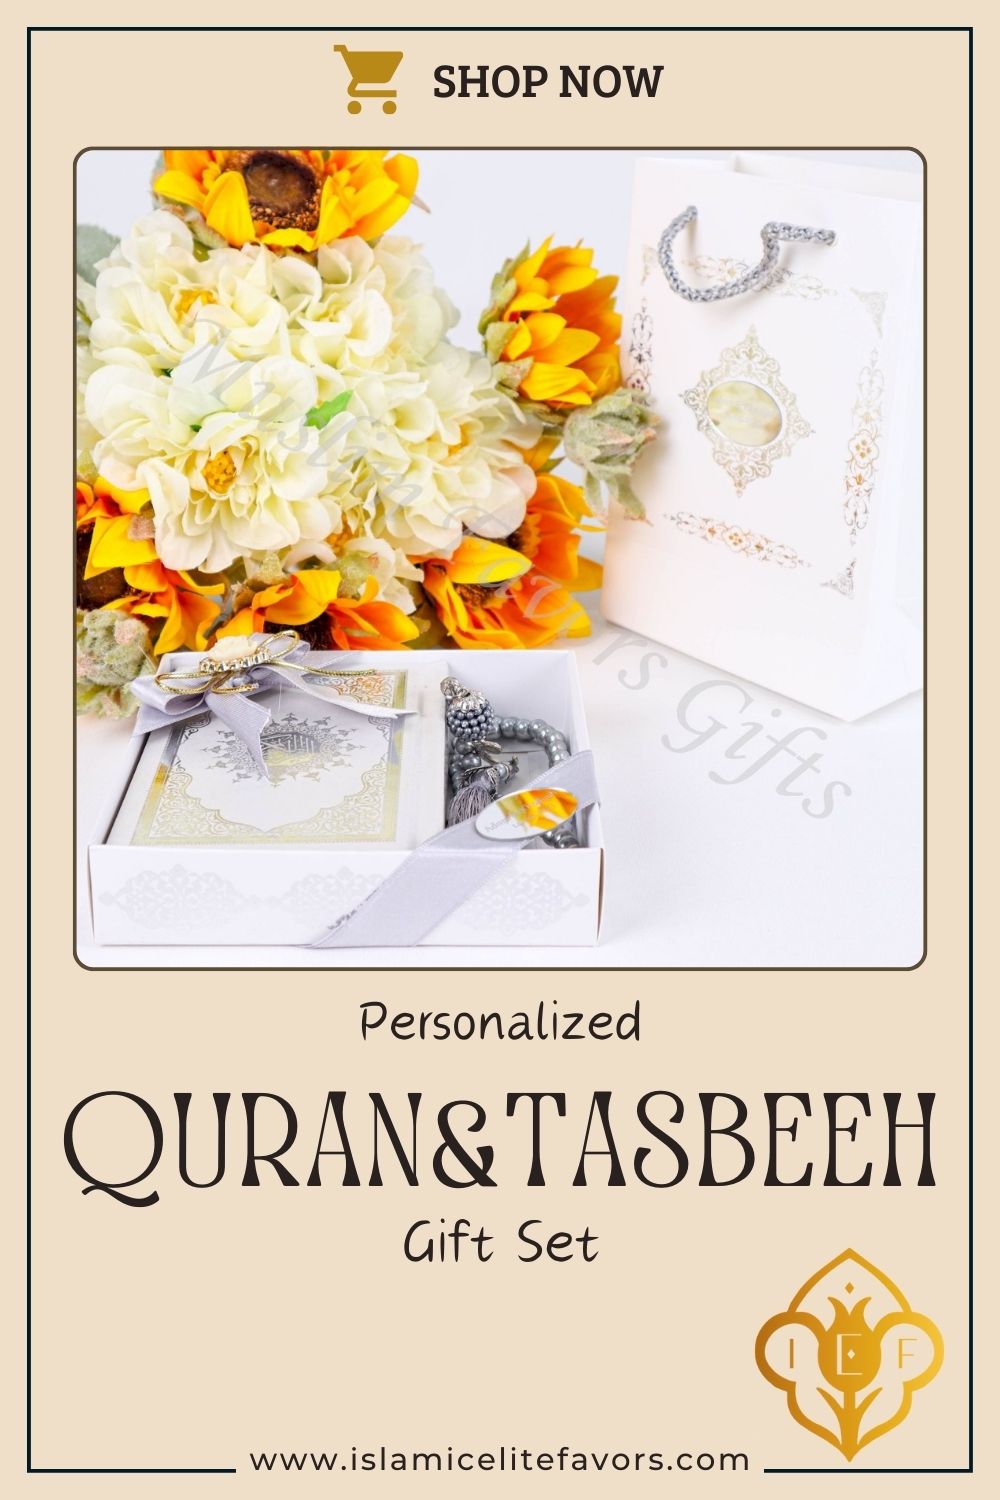 Personalized Quran Pearl Prayer Beads Islamic Muslim Wedding Gift Set - Islamic Elite Favors is a handmade gift shop offering a wide variety of unique and personalized gifts for all occasions. Whether you're looking for the perfect Ramadan, Eid, Hajj, wedding gift or something special for a birthday, baby shower or anniversary, we have something for everyone. High quality, made with love.